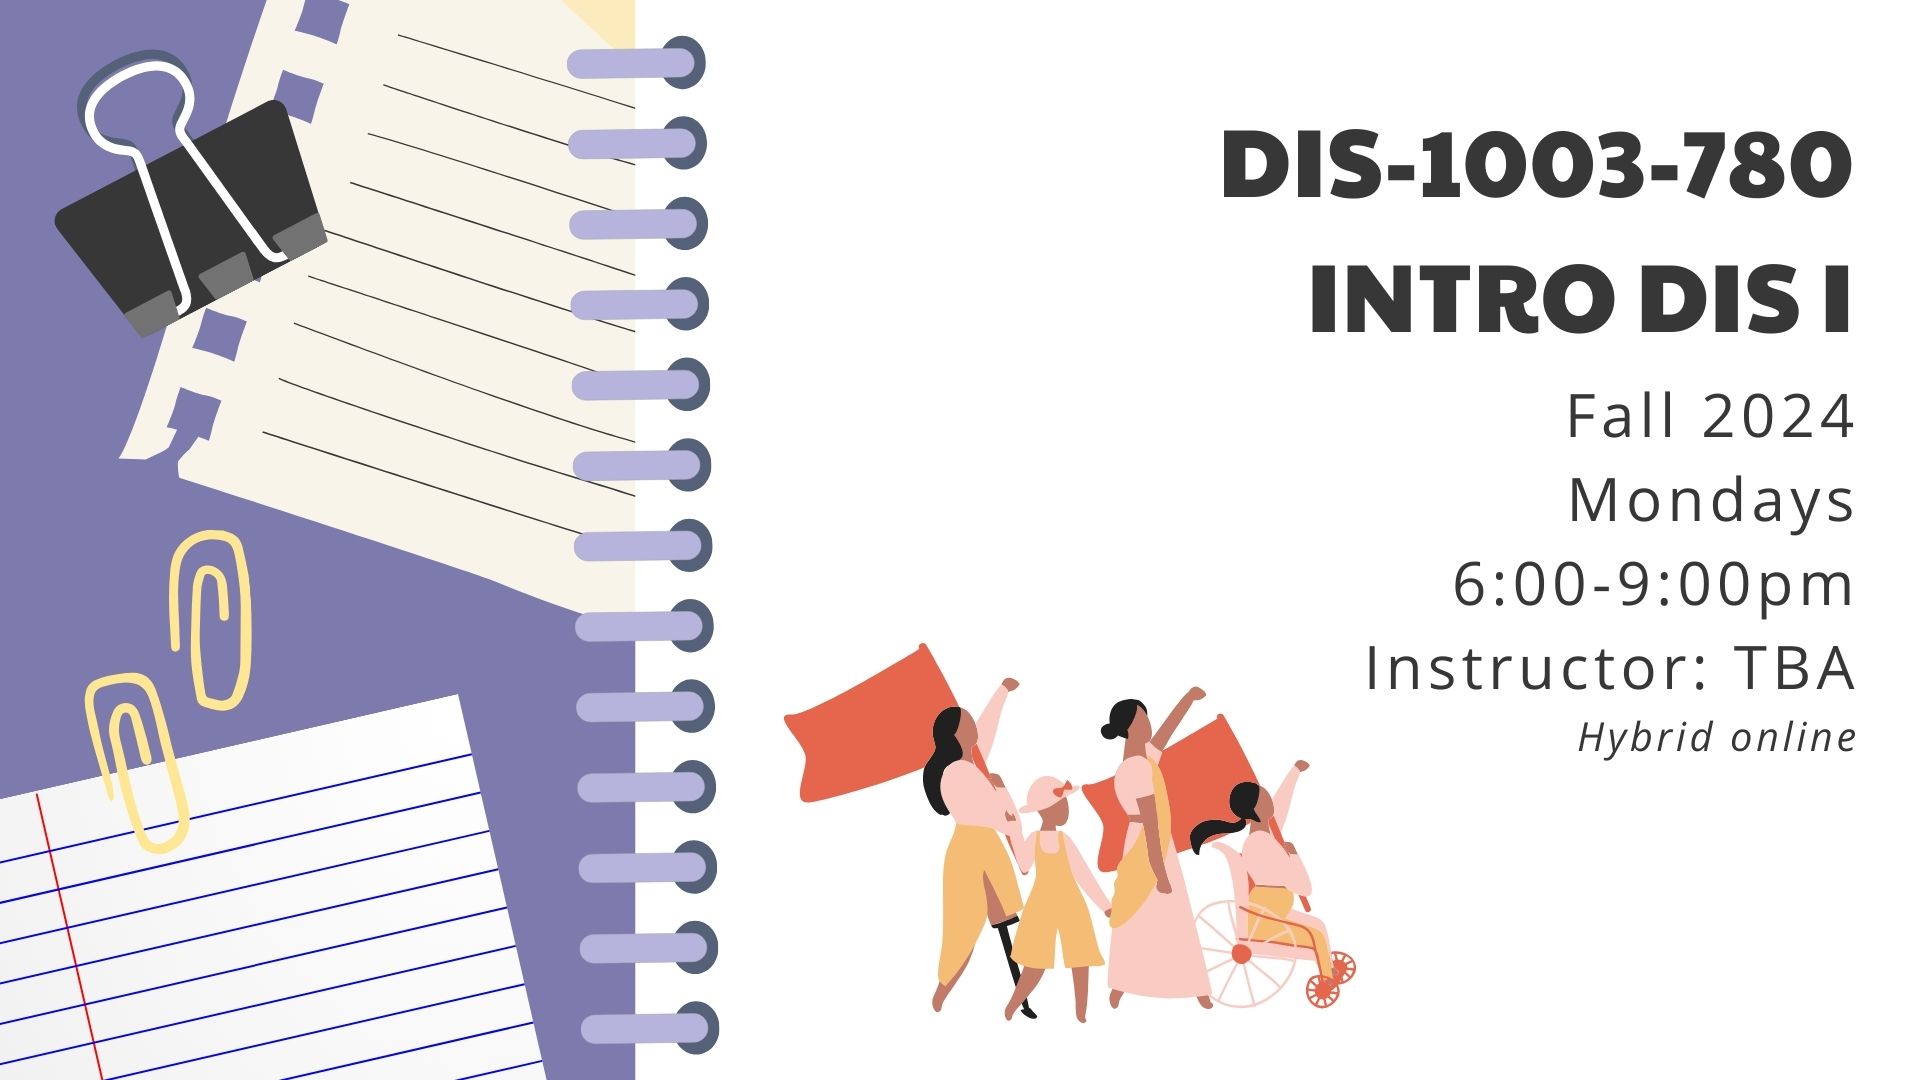 "DIS-1003-780 Intro DIS I; Fall 2024; Mondays; 6:00-9:00pm; Instructor: TBA; Hybrid online" written on cartoon-style notebook page"